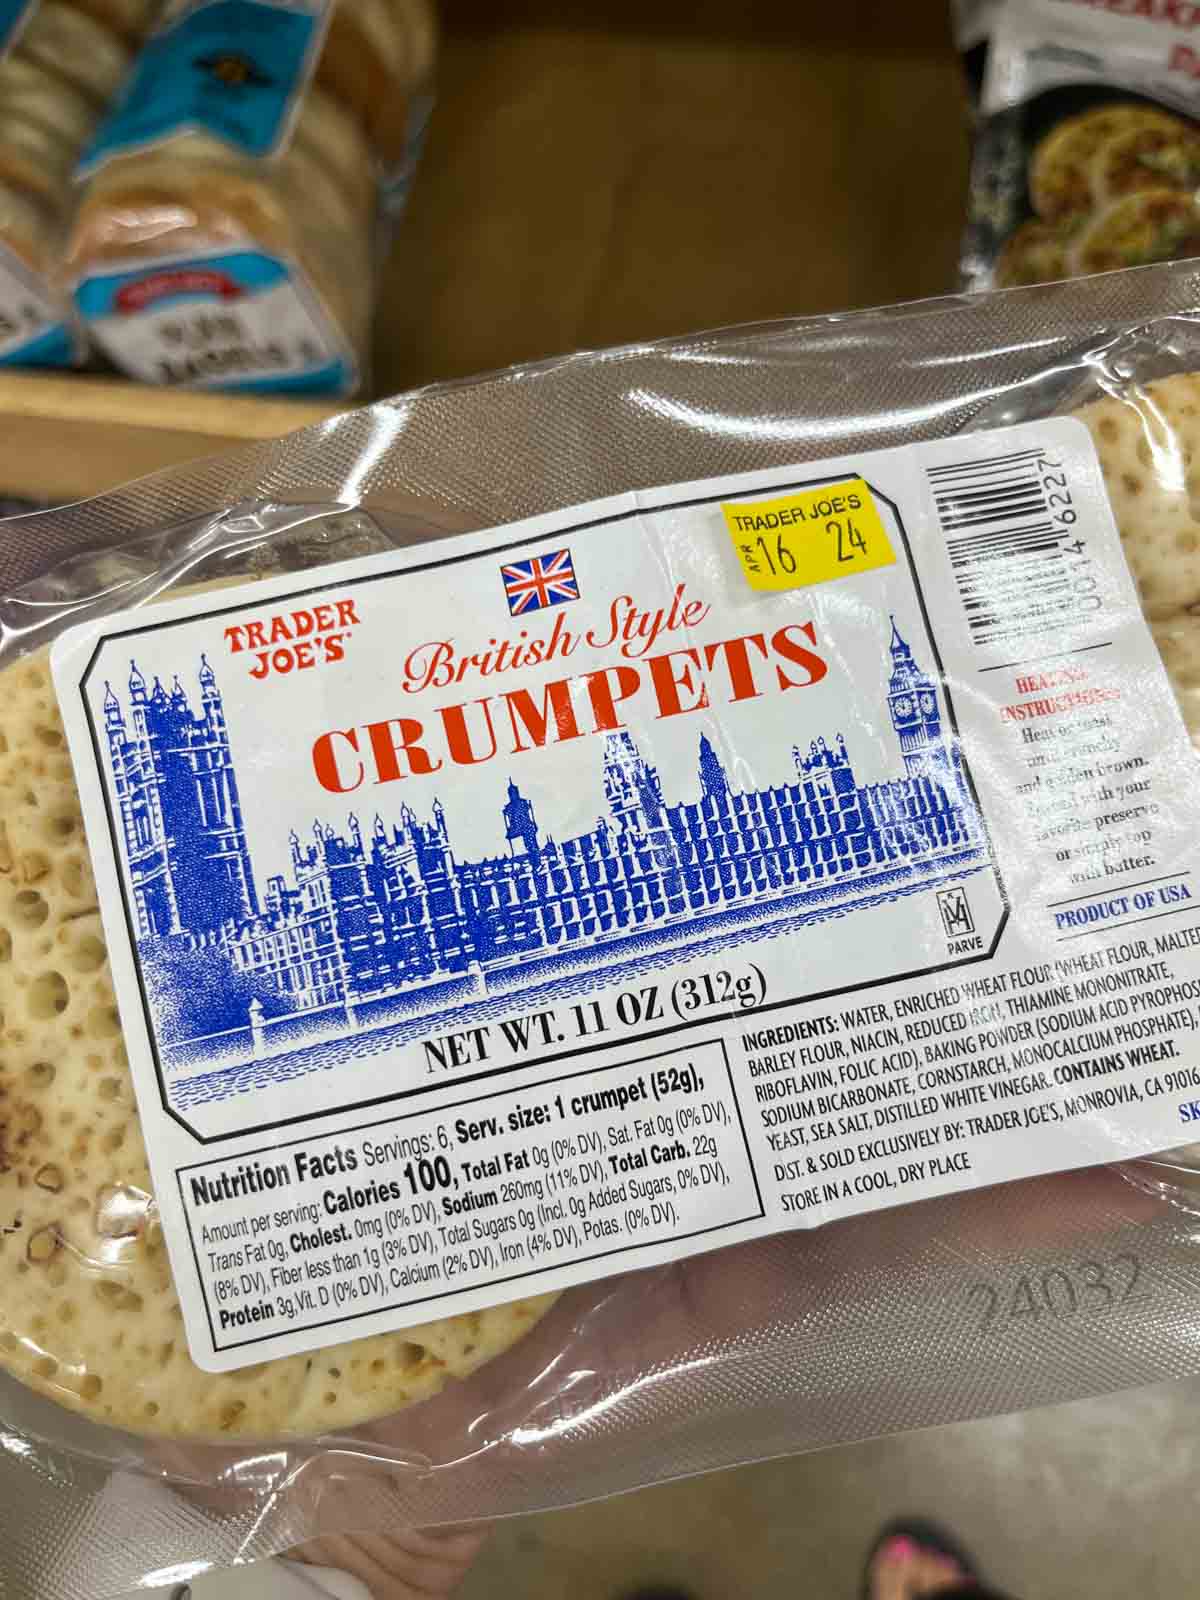 A package of Trader Joe's crumpets.